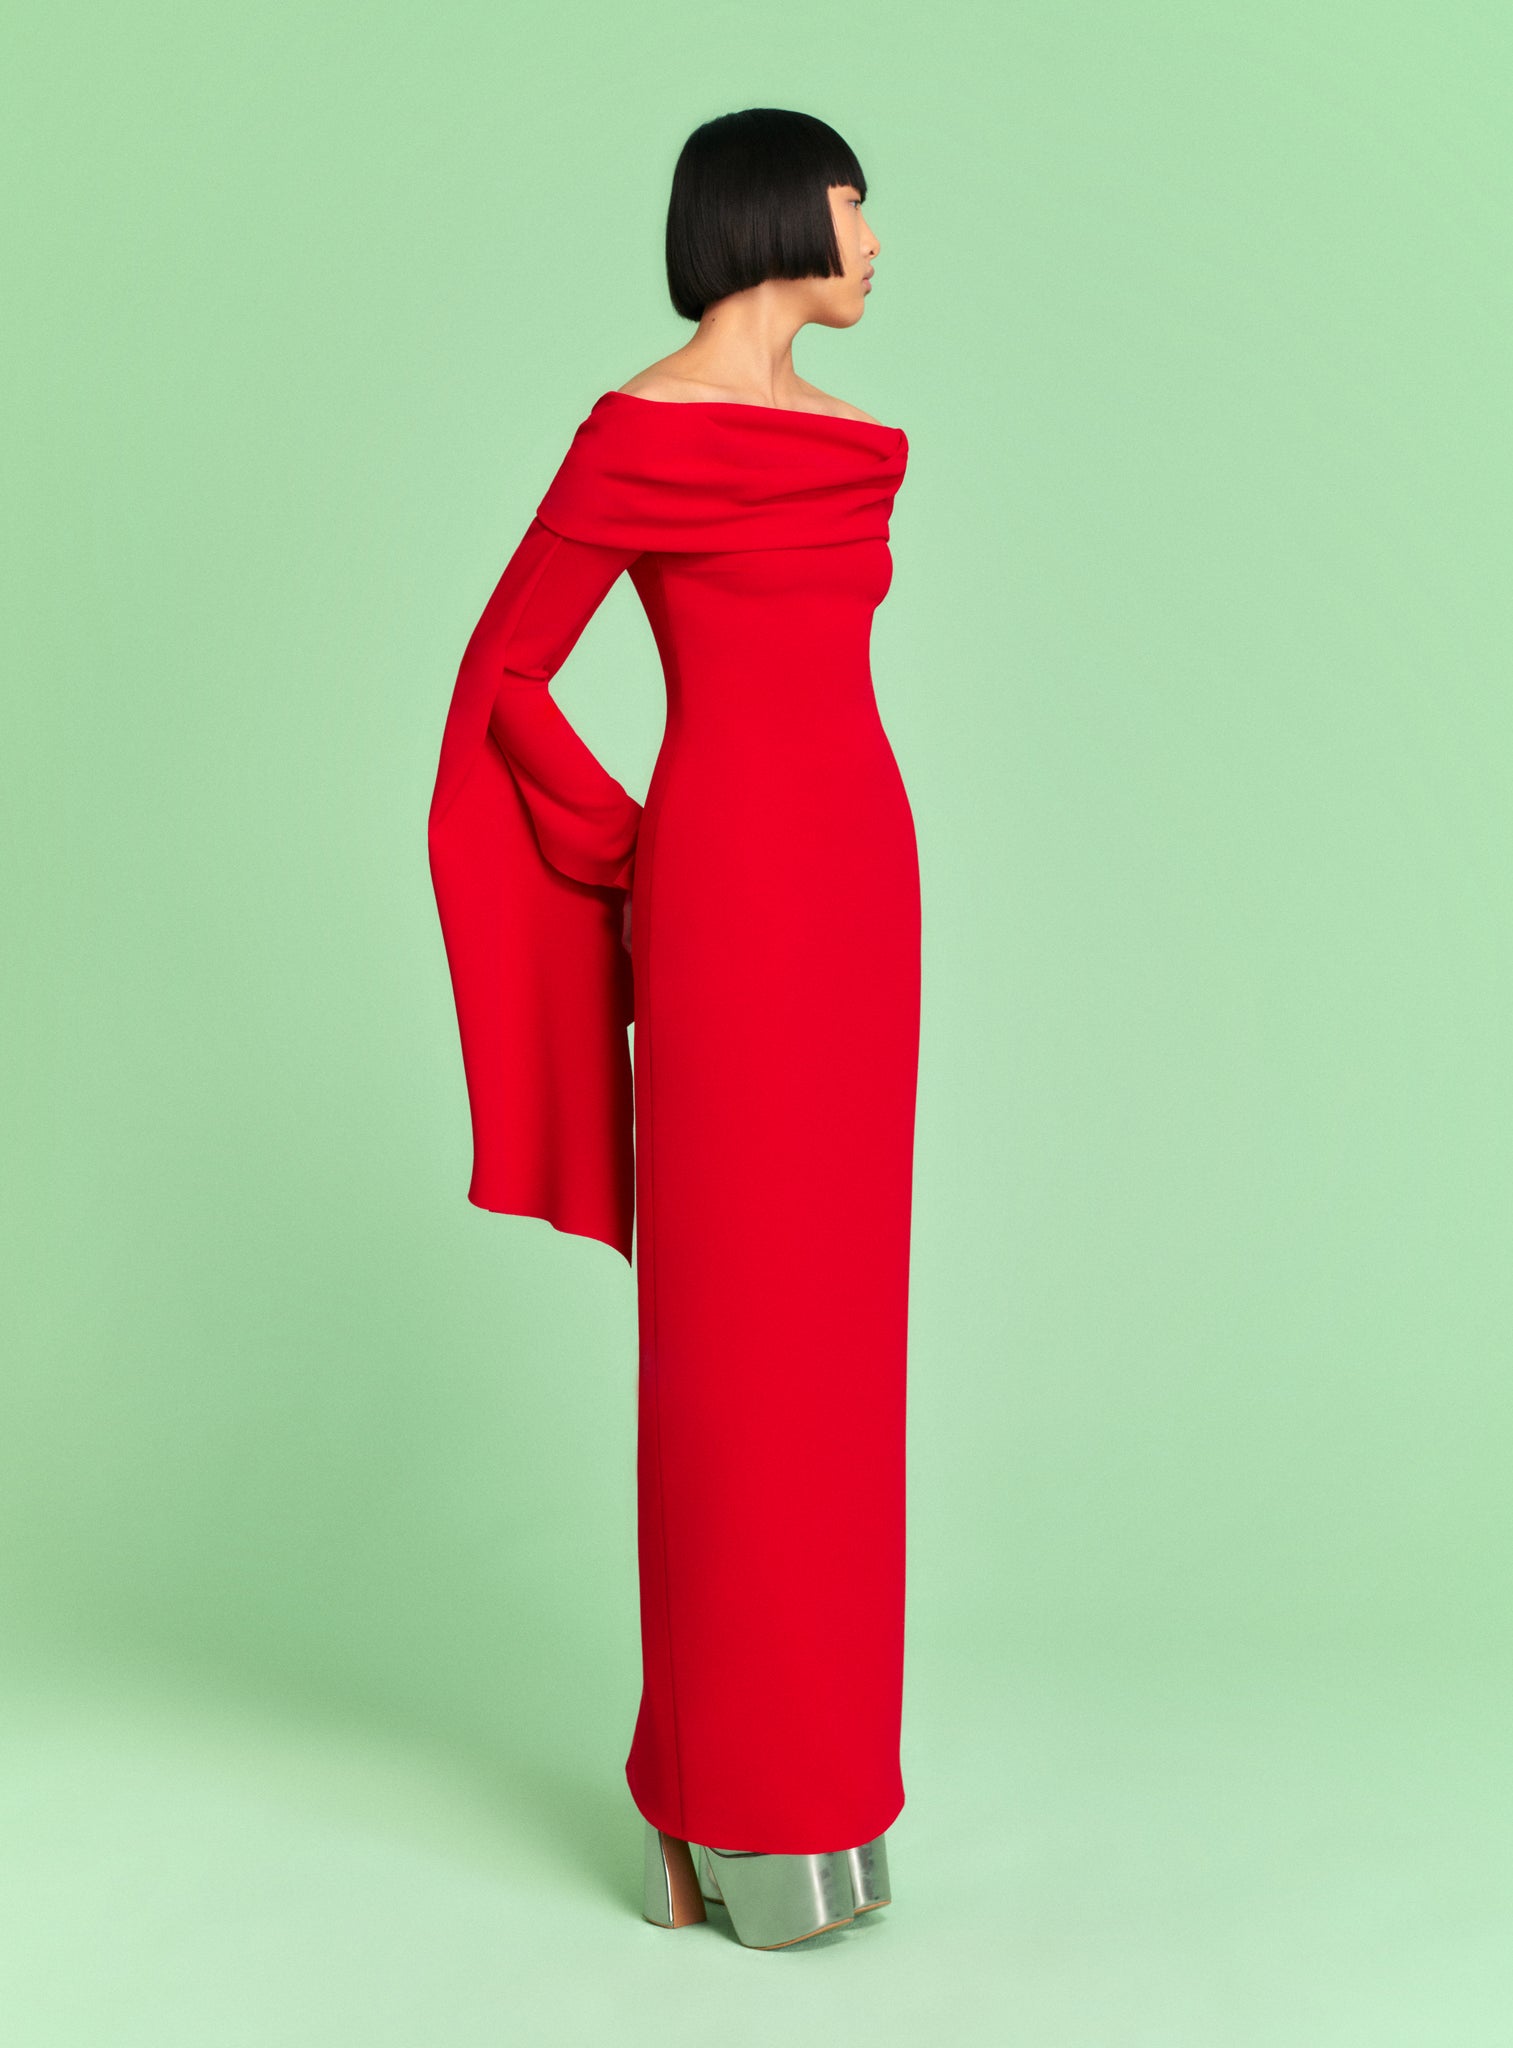 The Arden Maxi Dress in Red